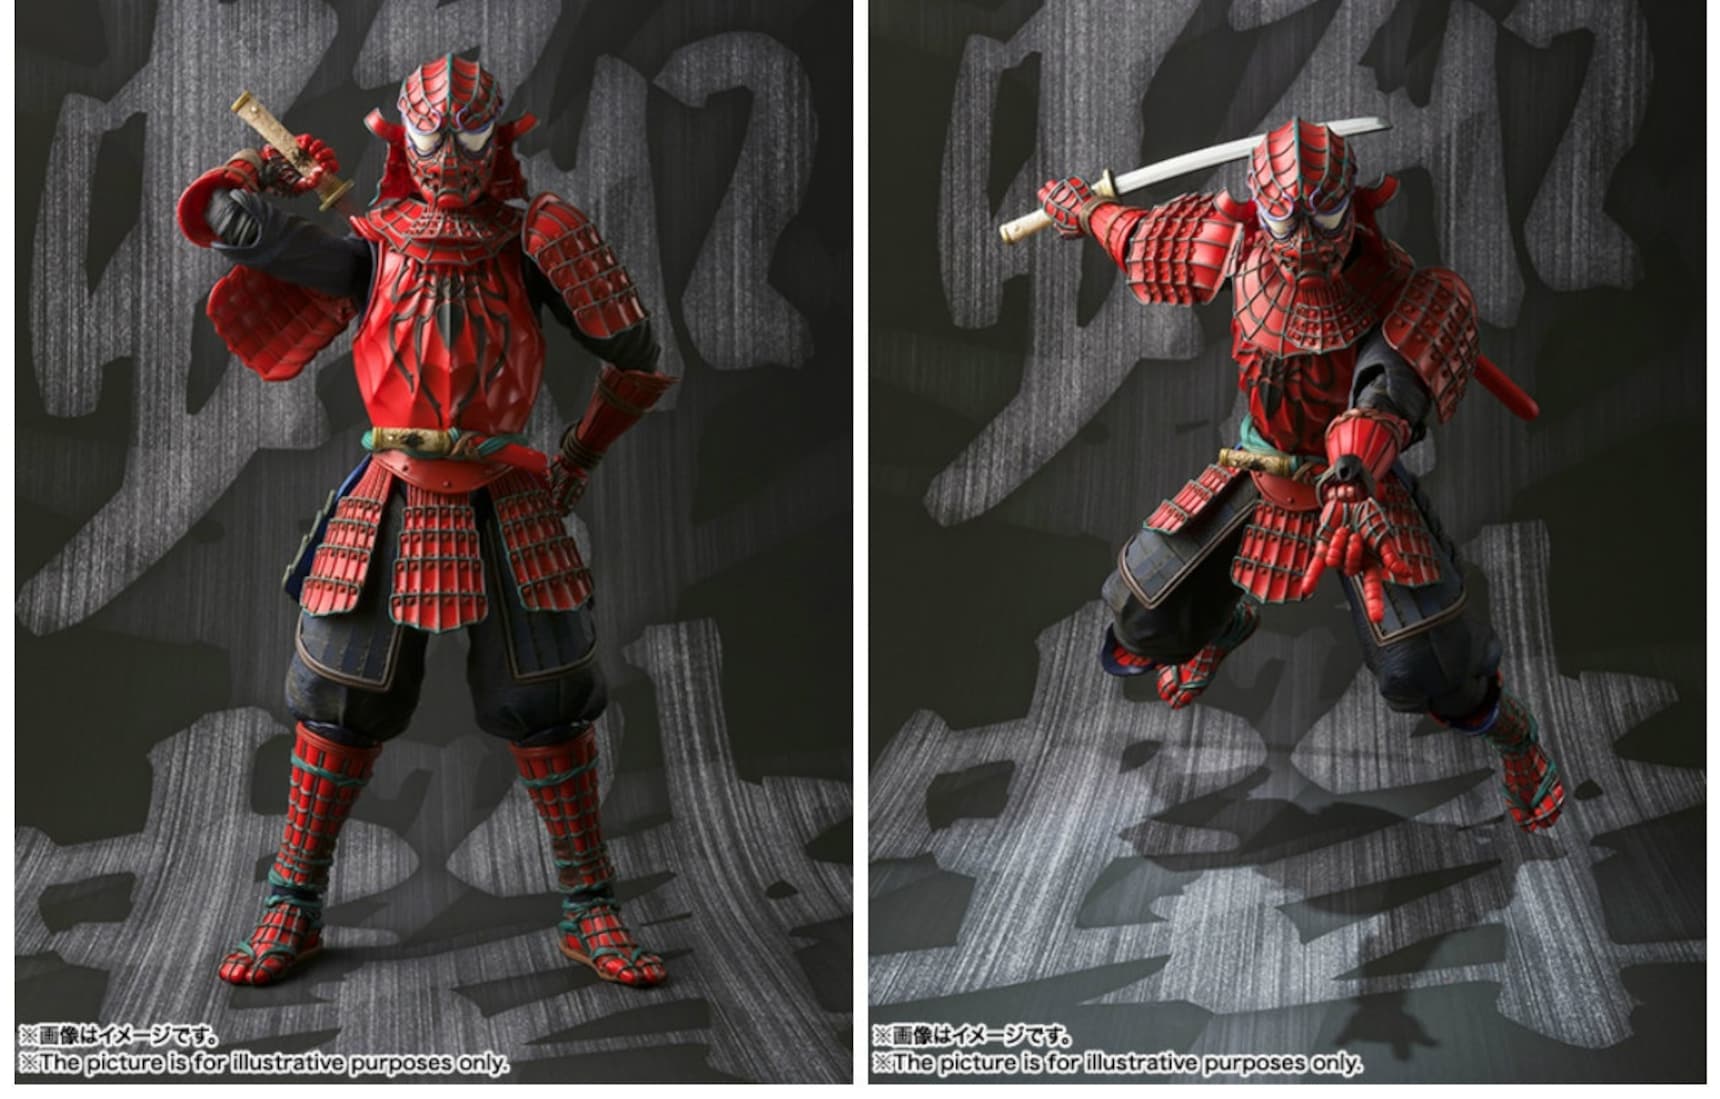 Look out! Here Comes the Samurai Spider-Man!